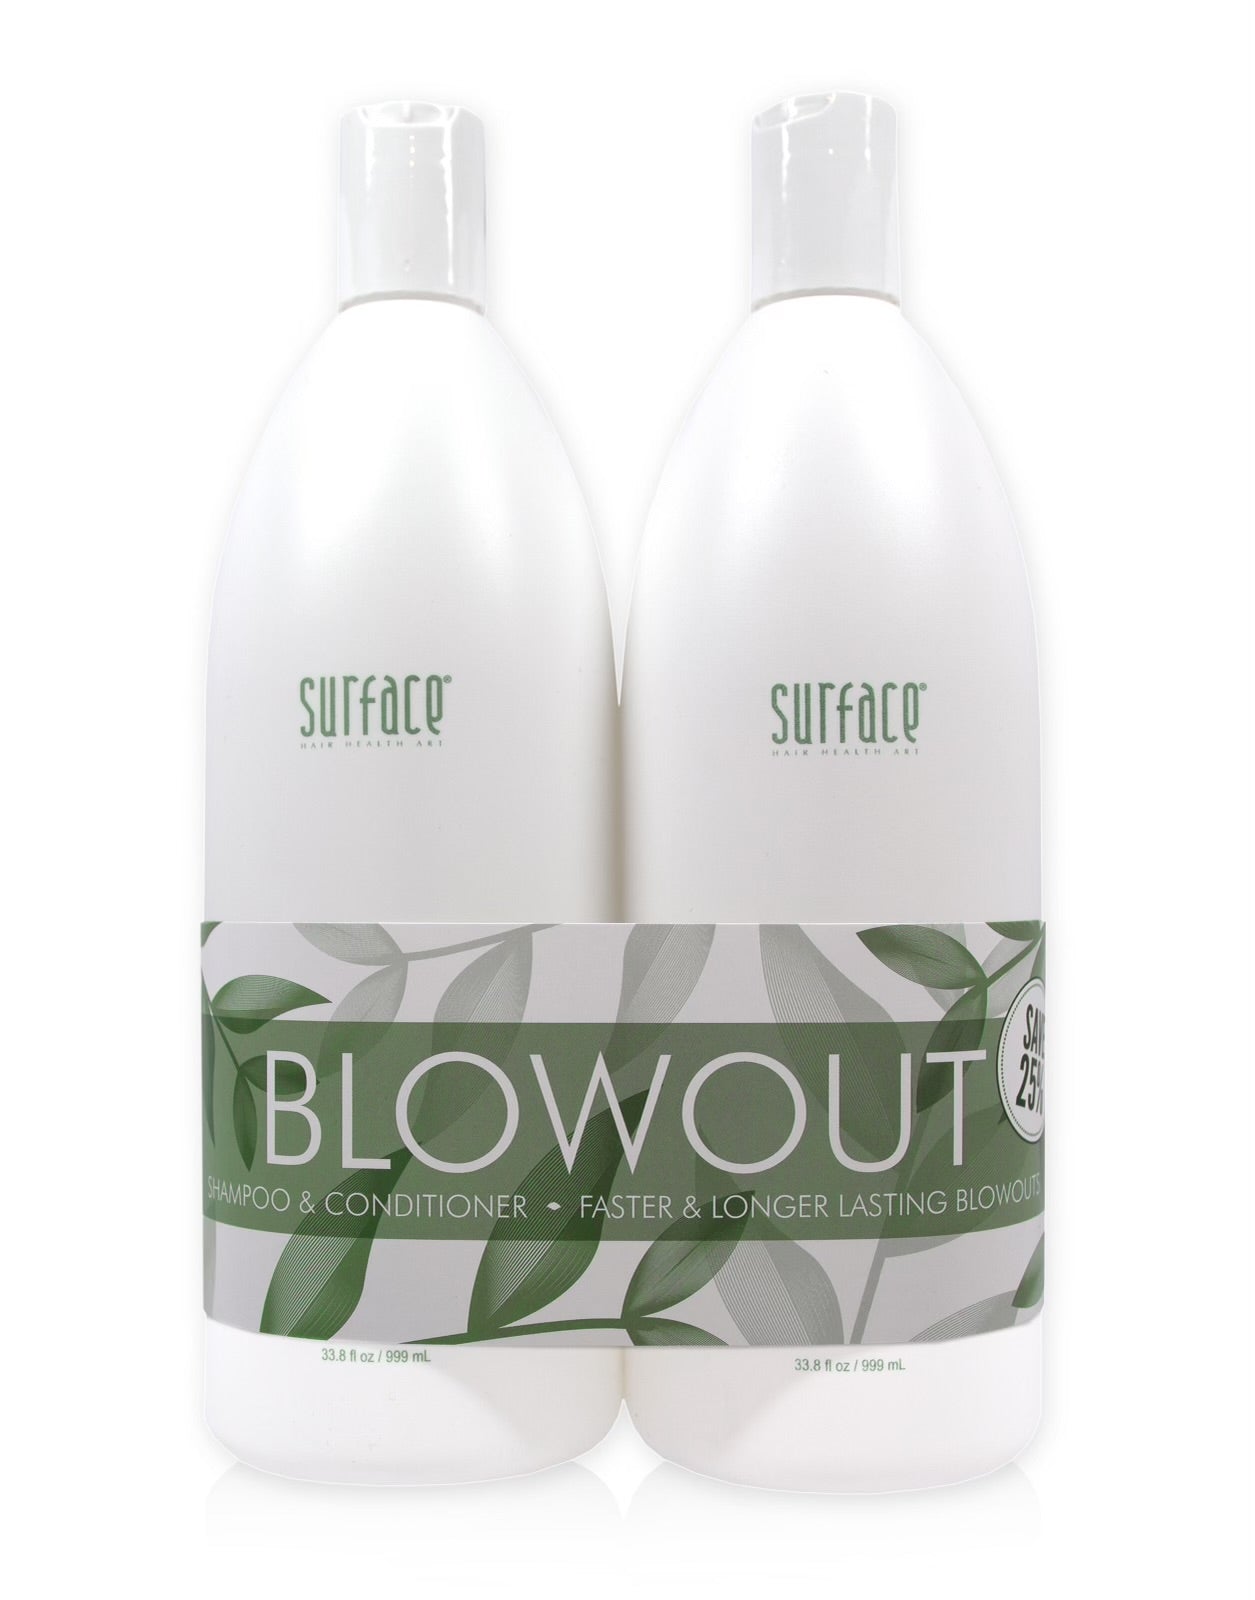 Blowout Shampoo and Conditioner Duo - 25% Off